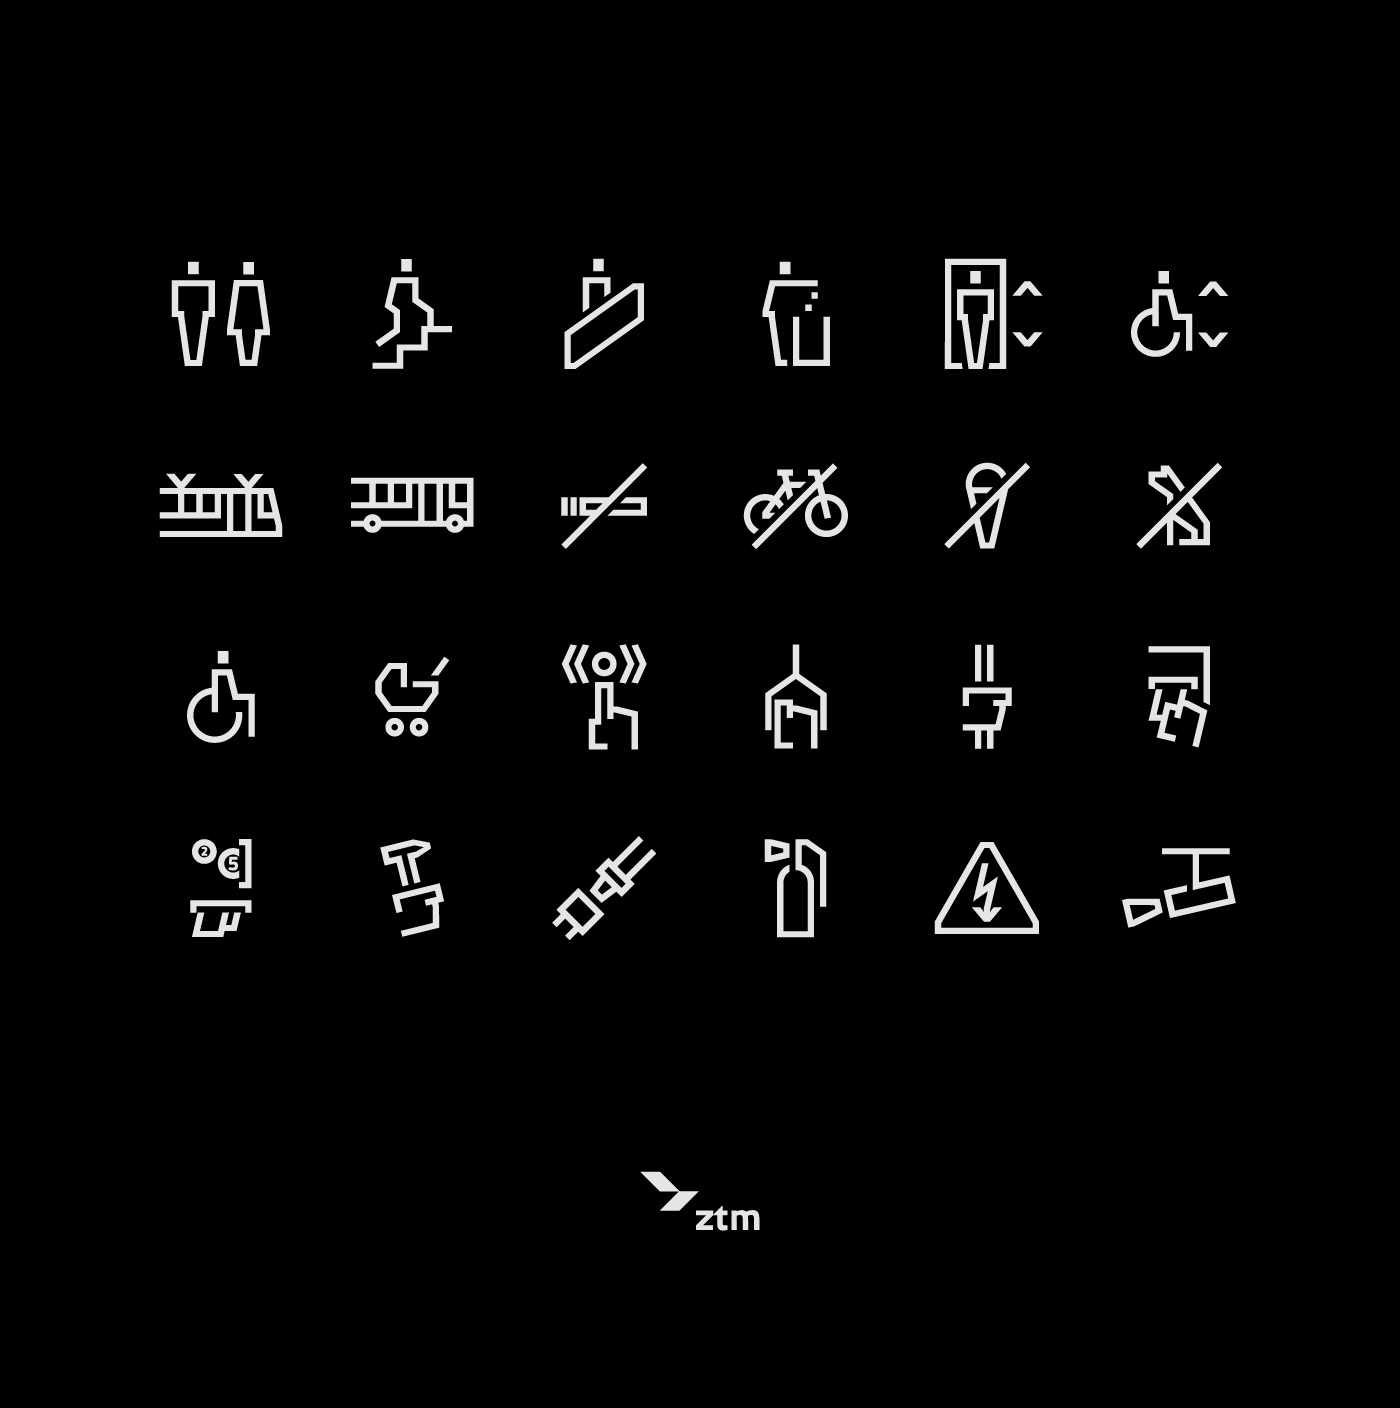 Icon icons sign symbol wayfinding pictograms